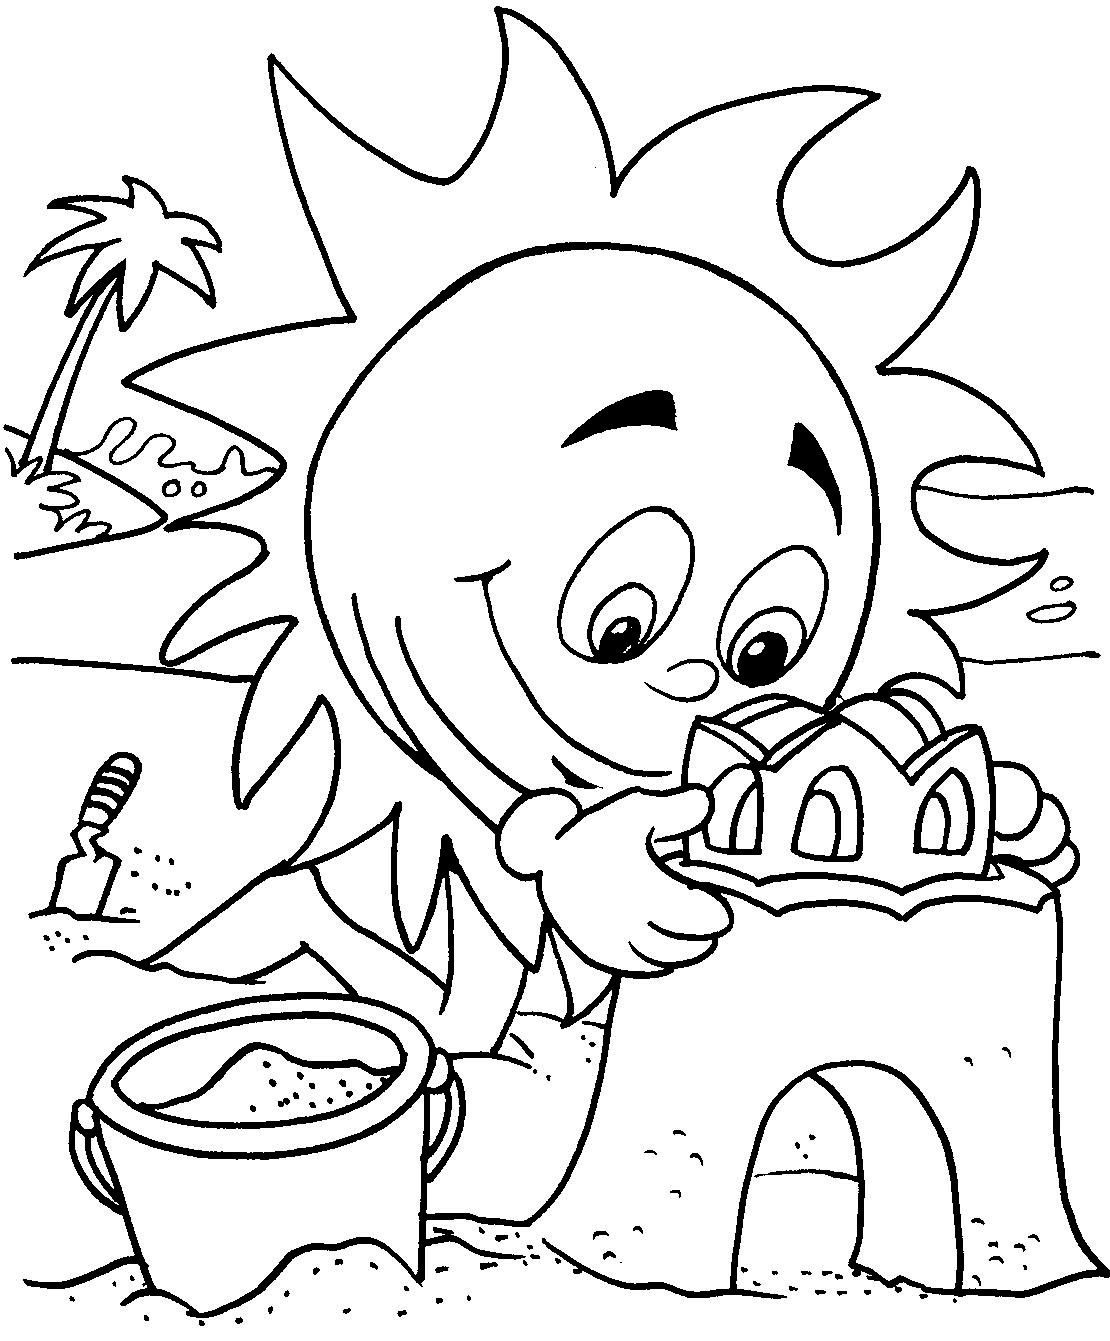 Sun at beach coloring page Download Free Sun at beach coloring page